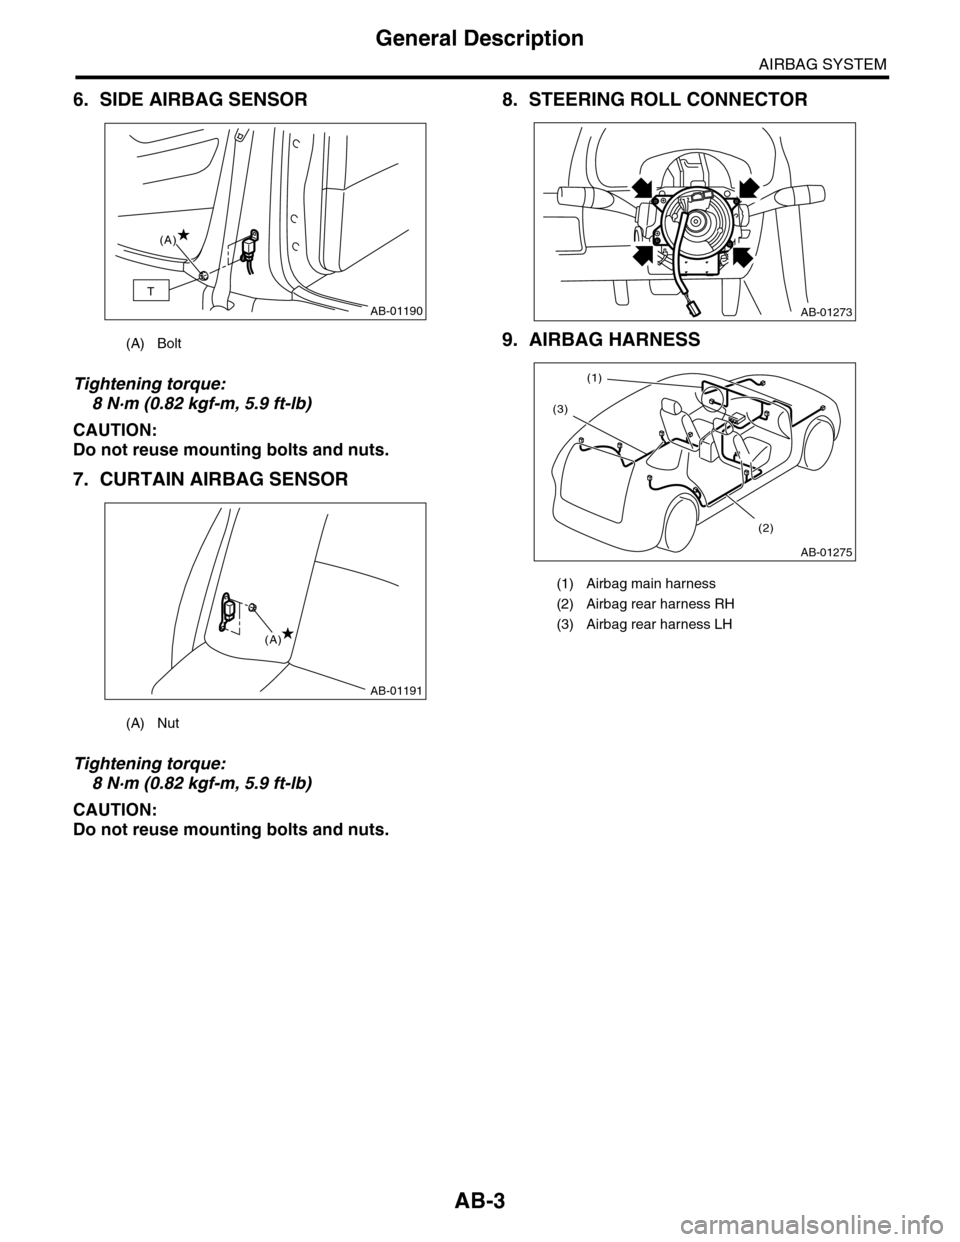 SUBARU TRIBECA 2009 1.G Service Workshop Manual AB-3
General Description
AIRBAG SYSTEM
6. SIDE AIRBAG SENSOR
Tightening torque:
8 N·m (0.82 kgf-m, 5.9 ft-lb)
CAUTION:
Do not reuse mounting bolts and nuts.
7. CURTAIN AIRBAG SENSOR
Tightening torque